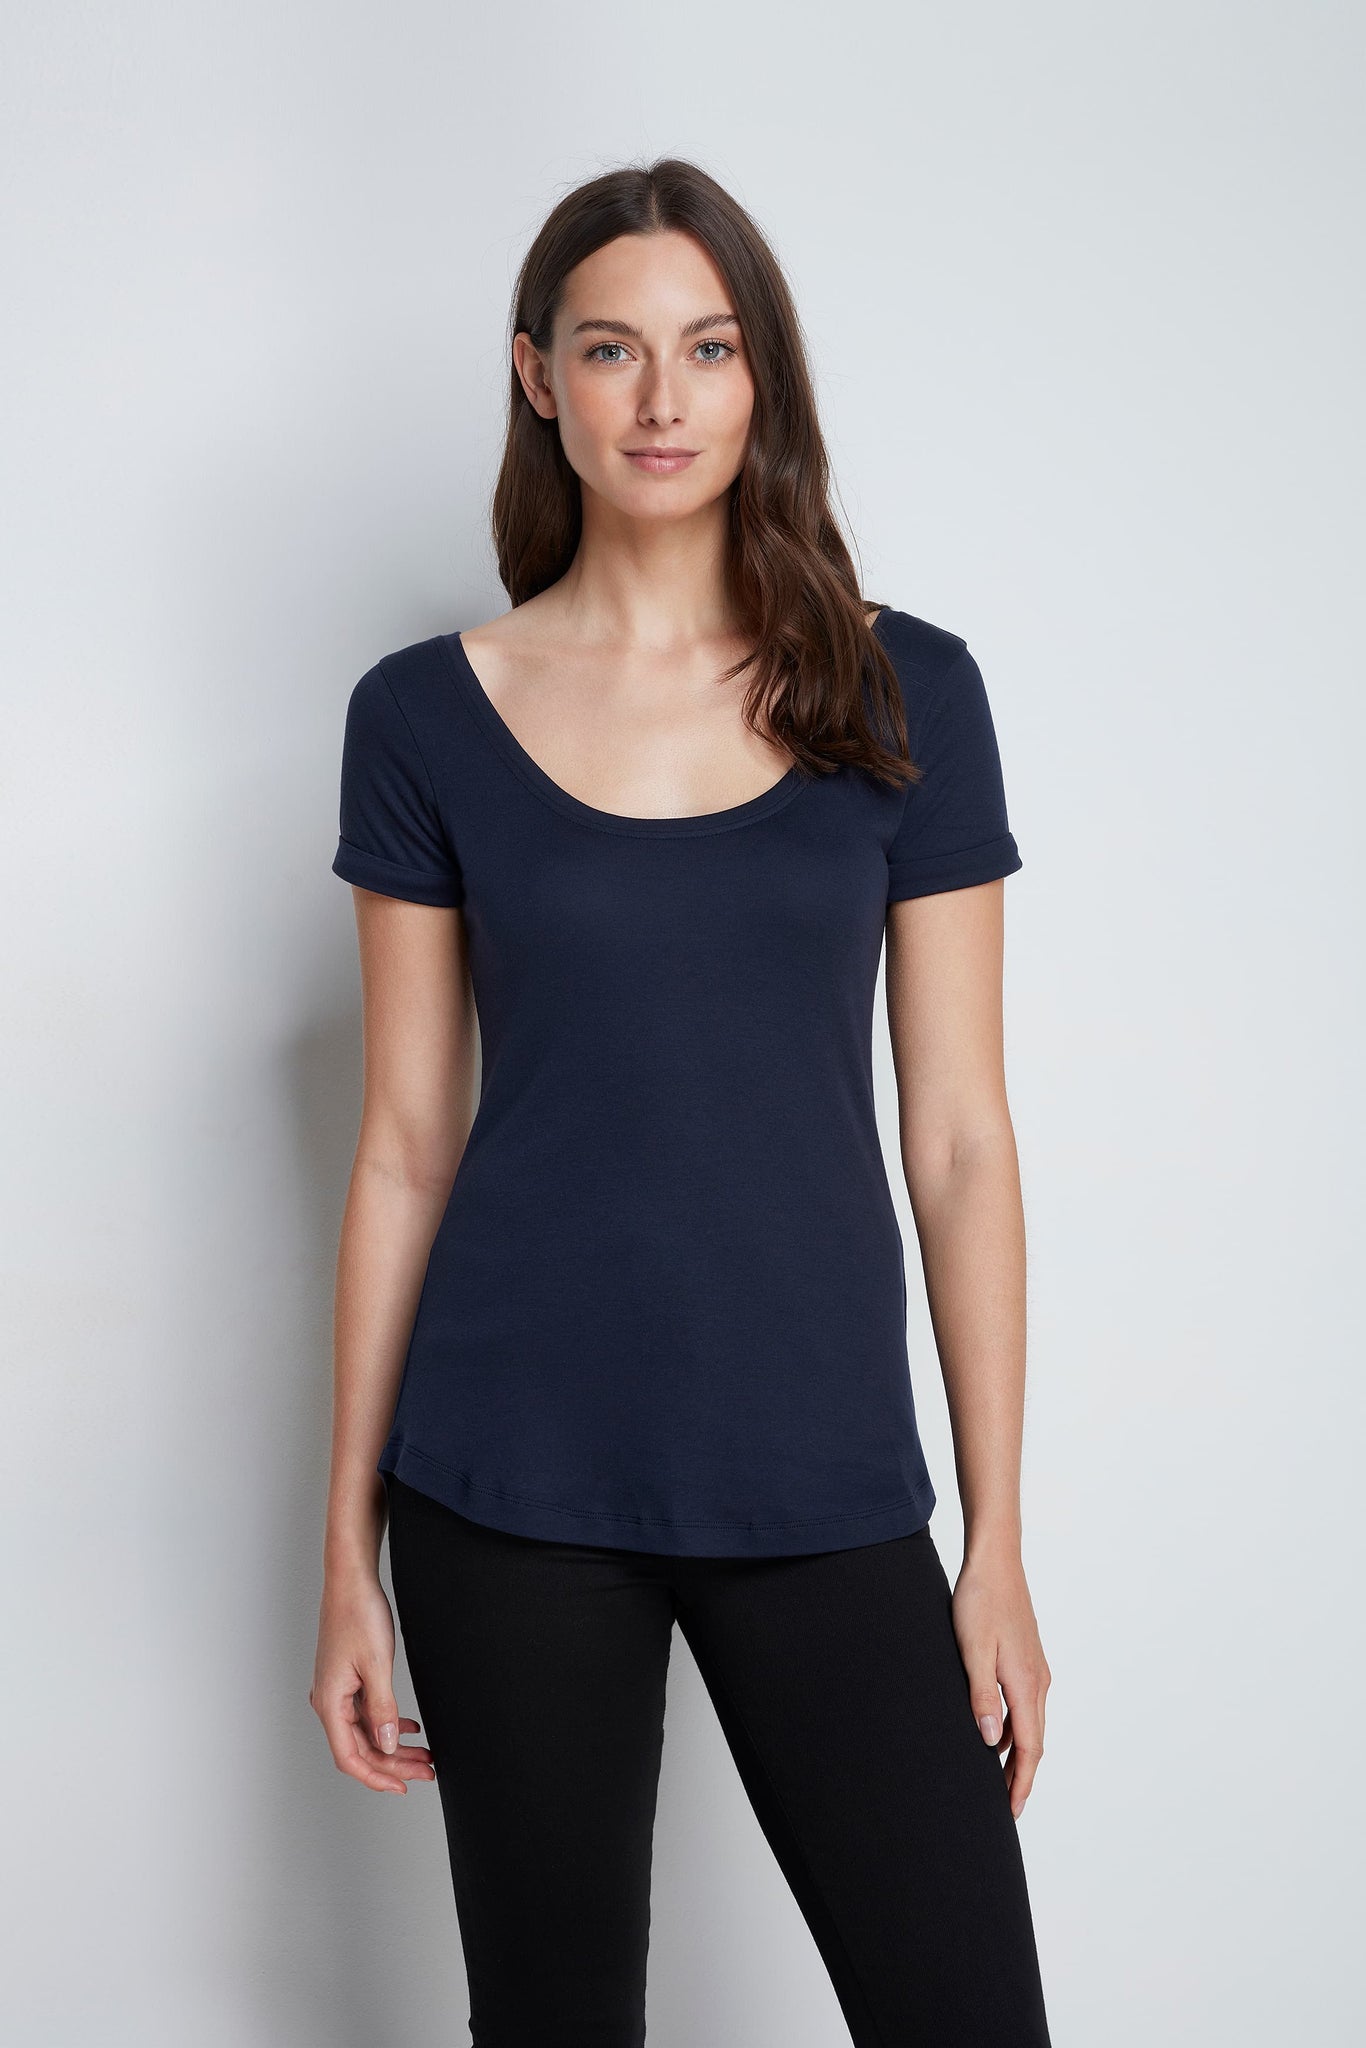 Women's Boat Neck Cotton Modal Blend Short Sleeved T-Shirt in Navy by Lavender Hill Clothing